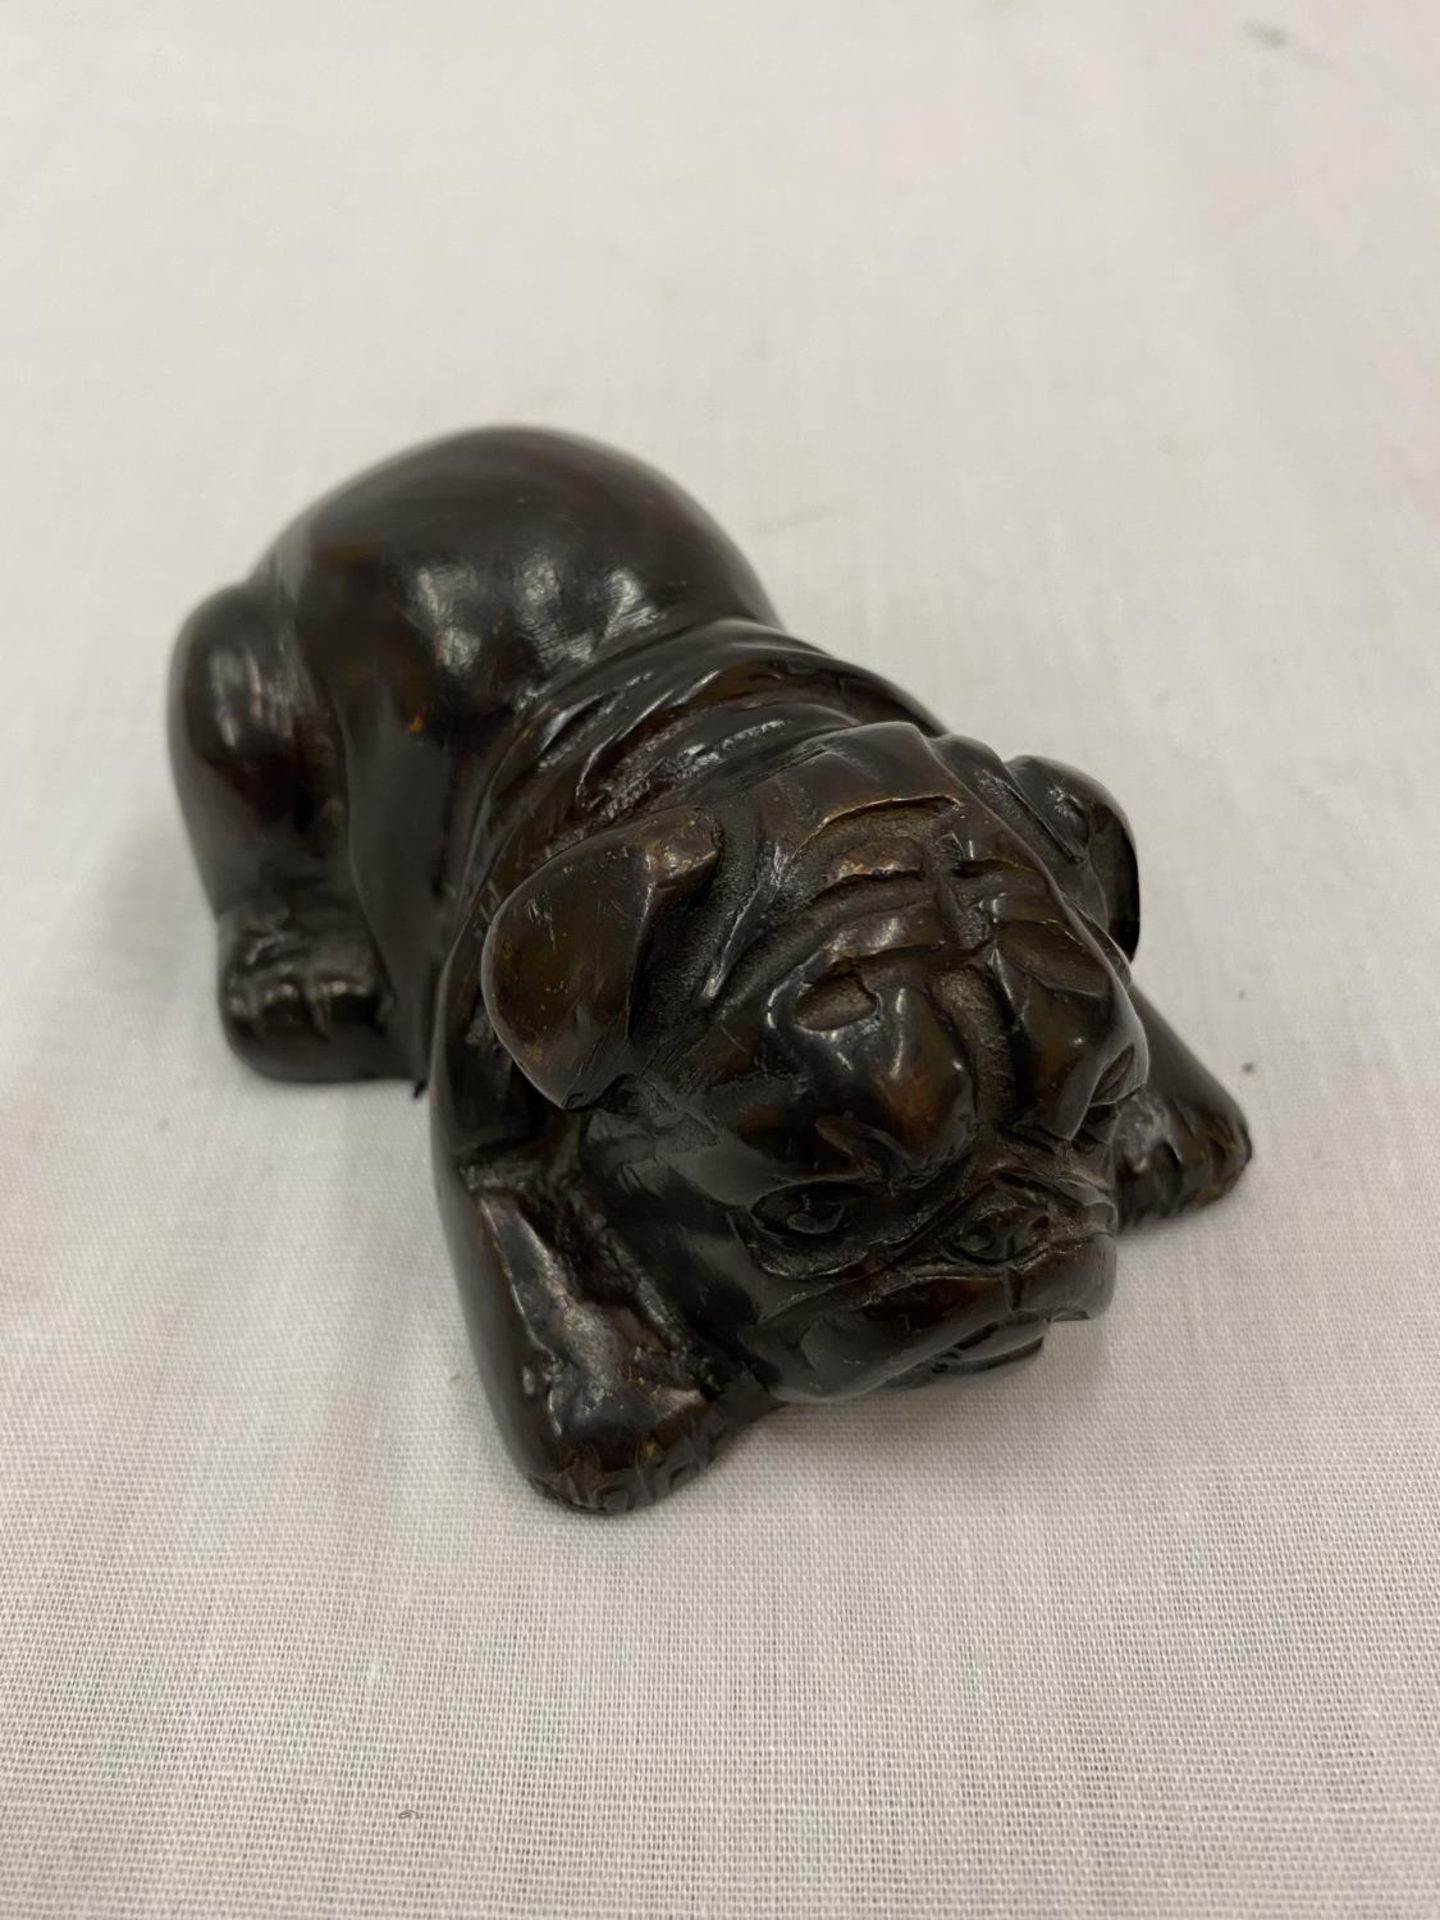 A PAIR OF BRONZE BULLDOGS, ONE SITTING AND ONE LAYING DOWN, HEIGHT 7CM AND 4CM - Image 10 of 22